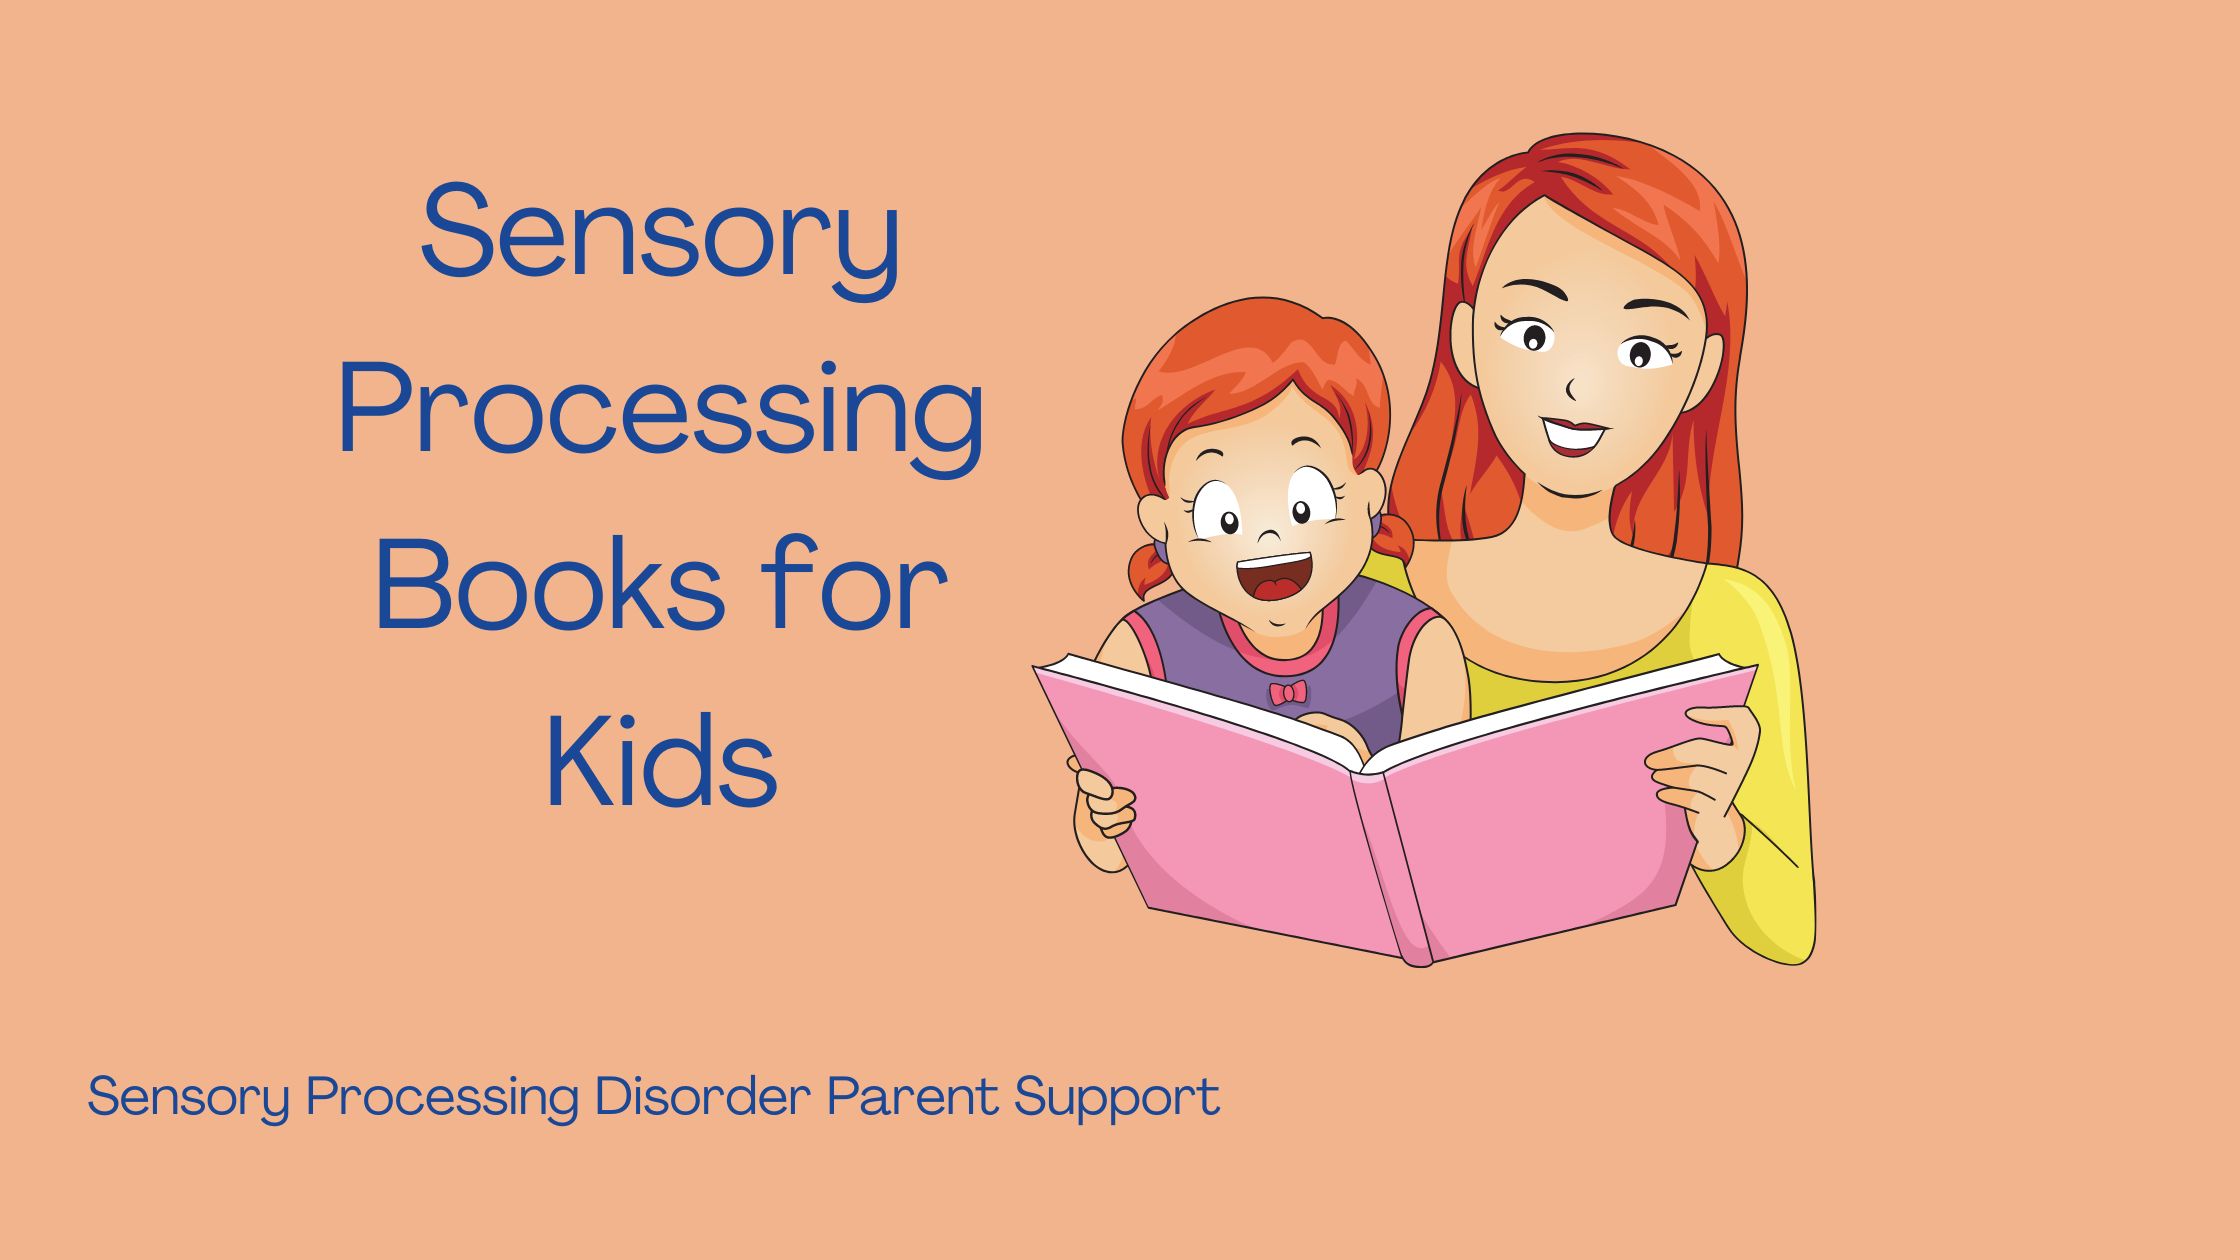 mom reading a book to her child about sensory processing disorder Sensory Processing Books for Kids & Parents